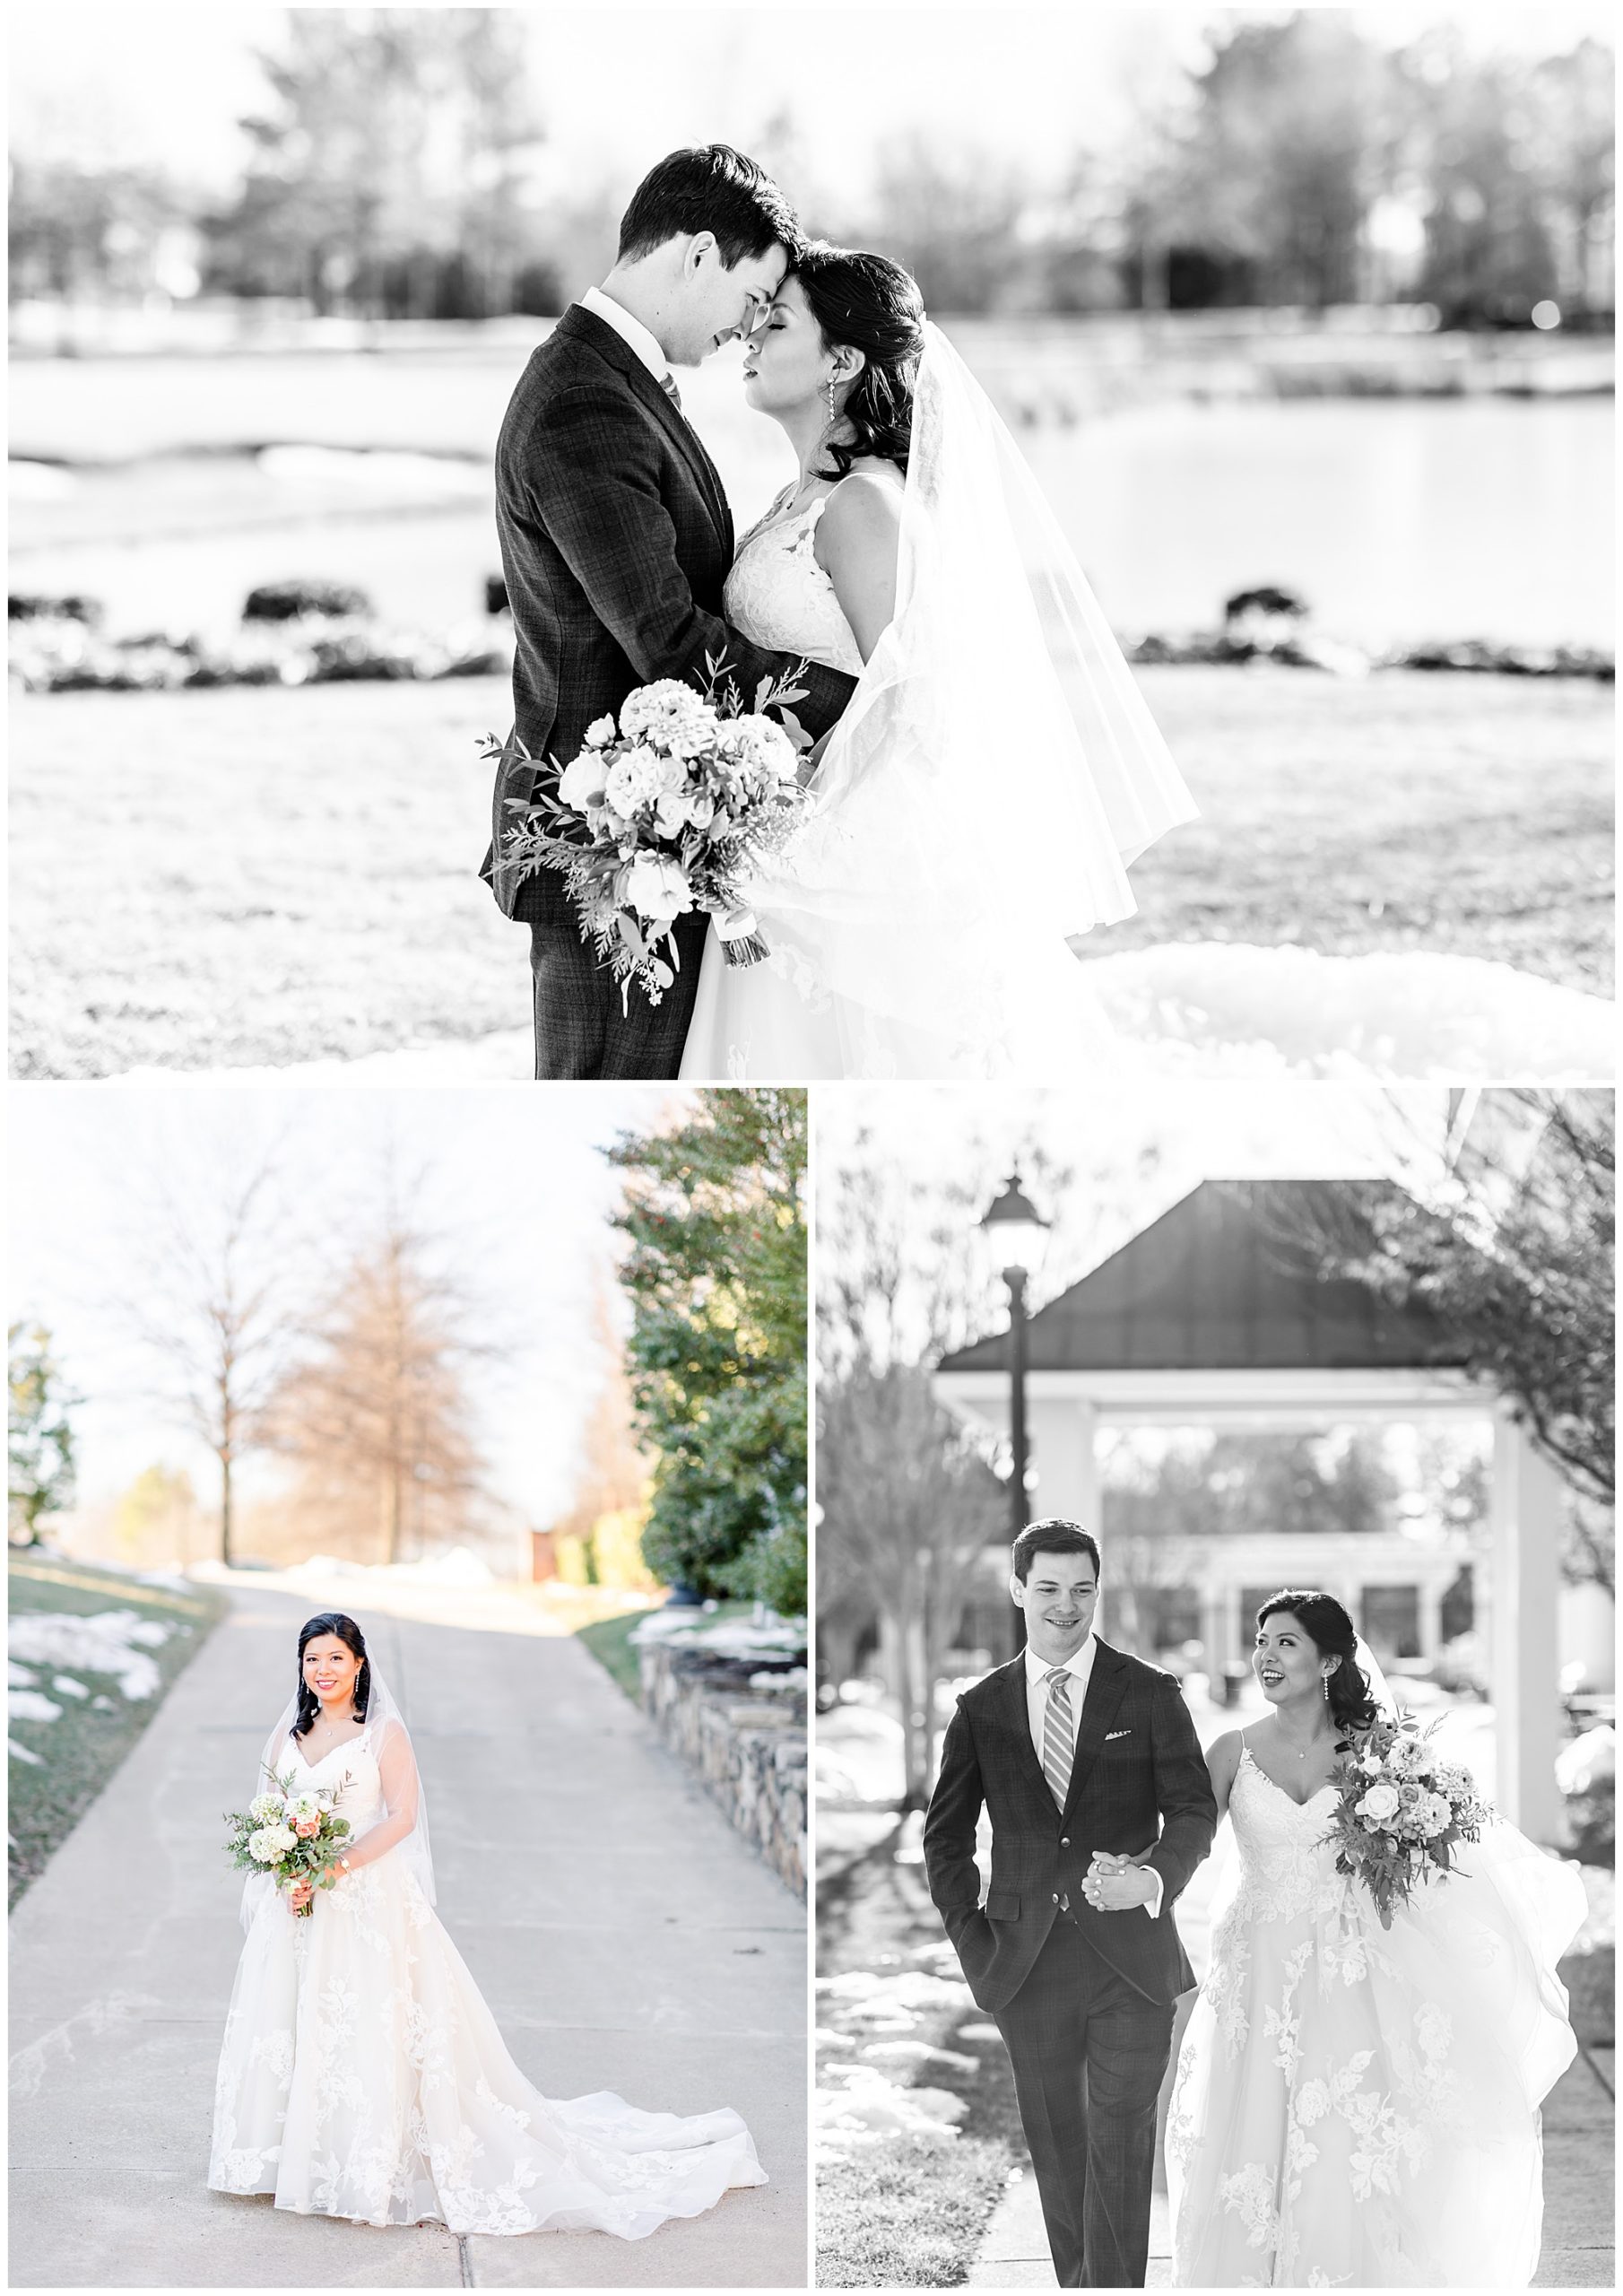 Regency at Dominion Valley wedding, Virginia country club wedding, Haymarket Virginia wedding, northern Virginia wedding, winter wedding, winter wedding aesthetic, DC micro wedding, northern Virginia wedding venues, classic winter wedding, Rachel E.H. Photography, black and white, groom and bride touching foreheads